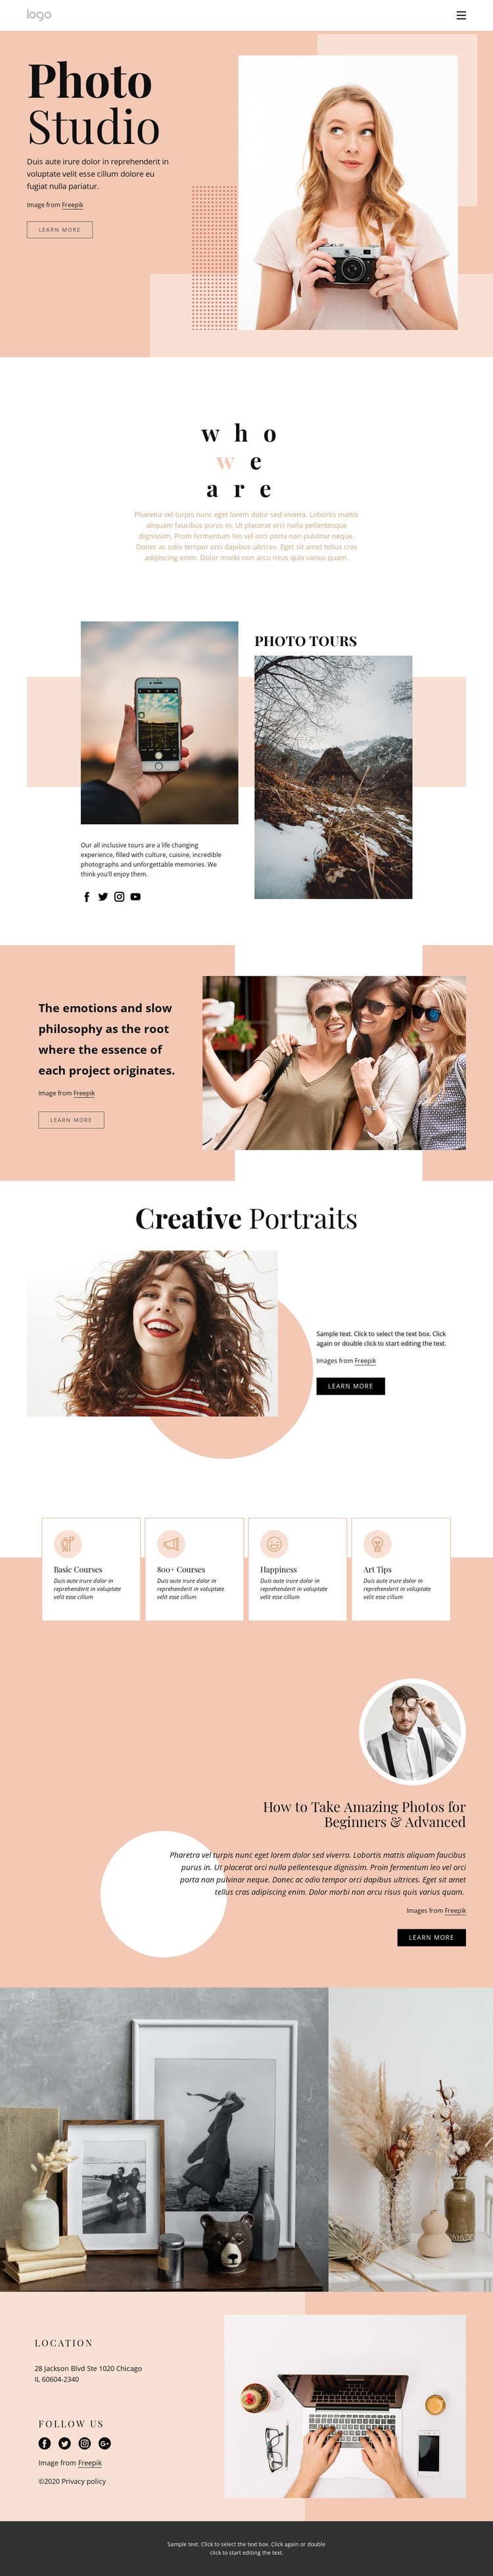 Photography courses HTML5 Template